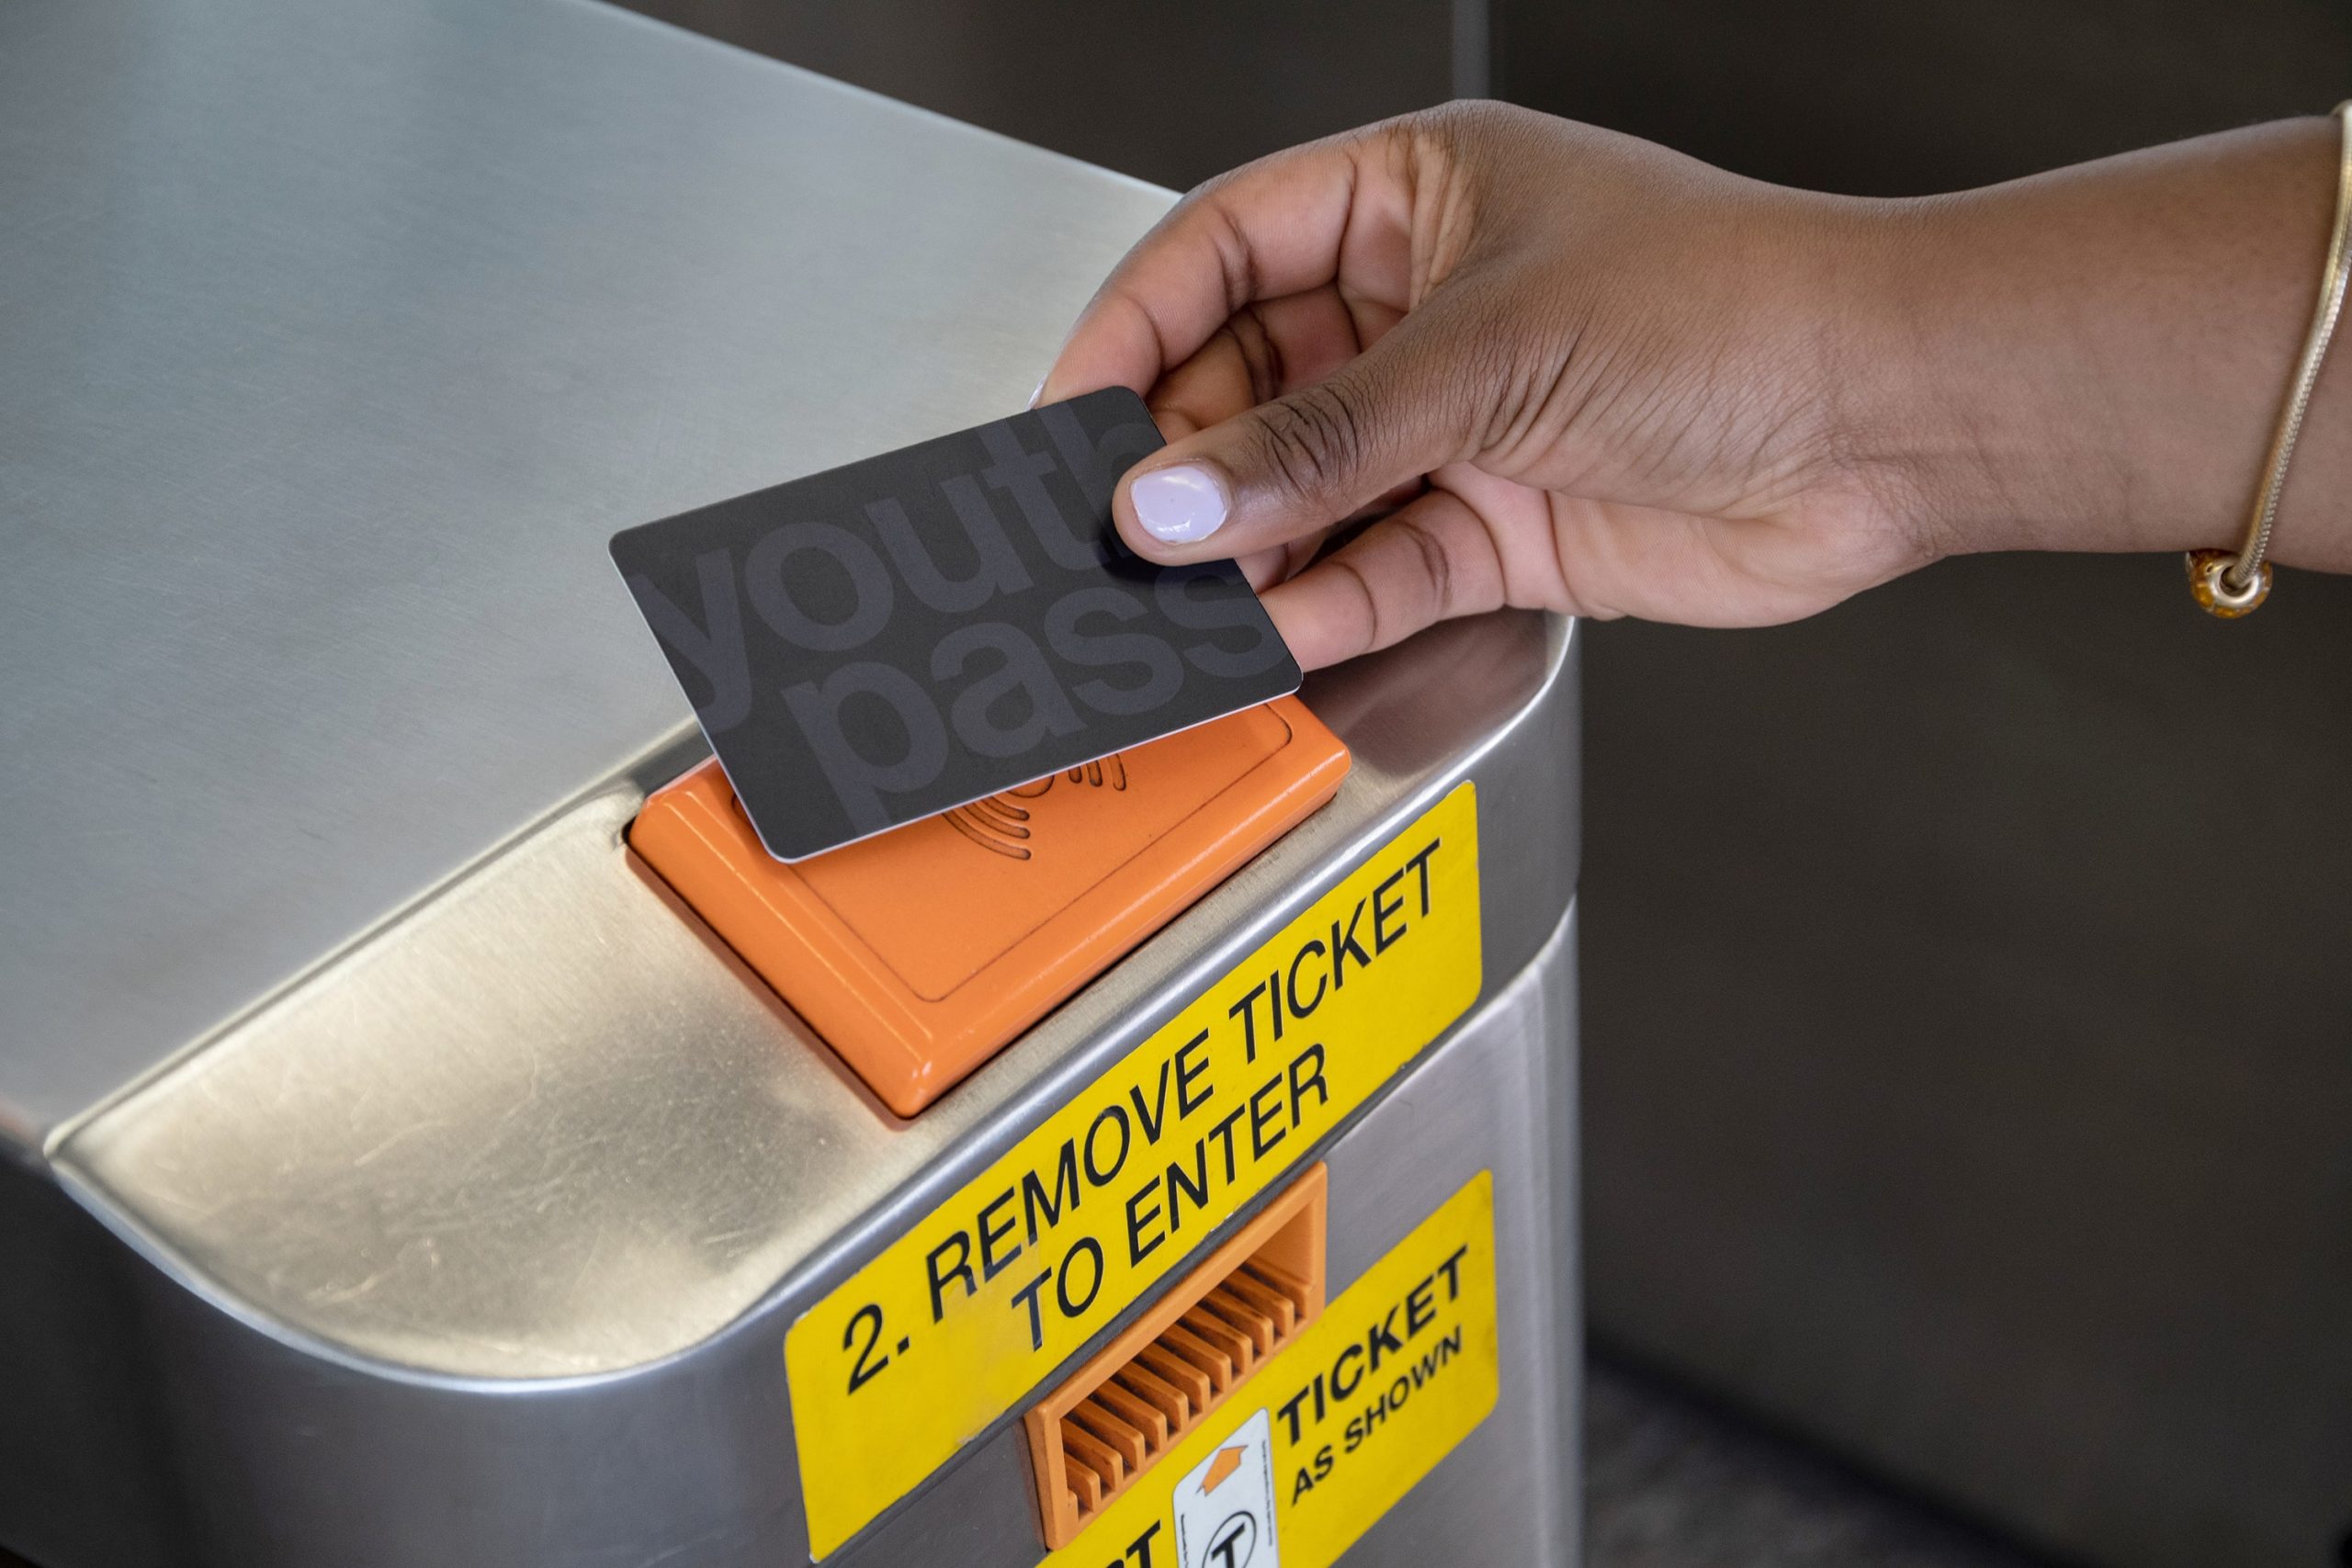 A hand holds a Youth Pass card to a card reader